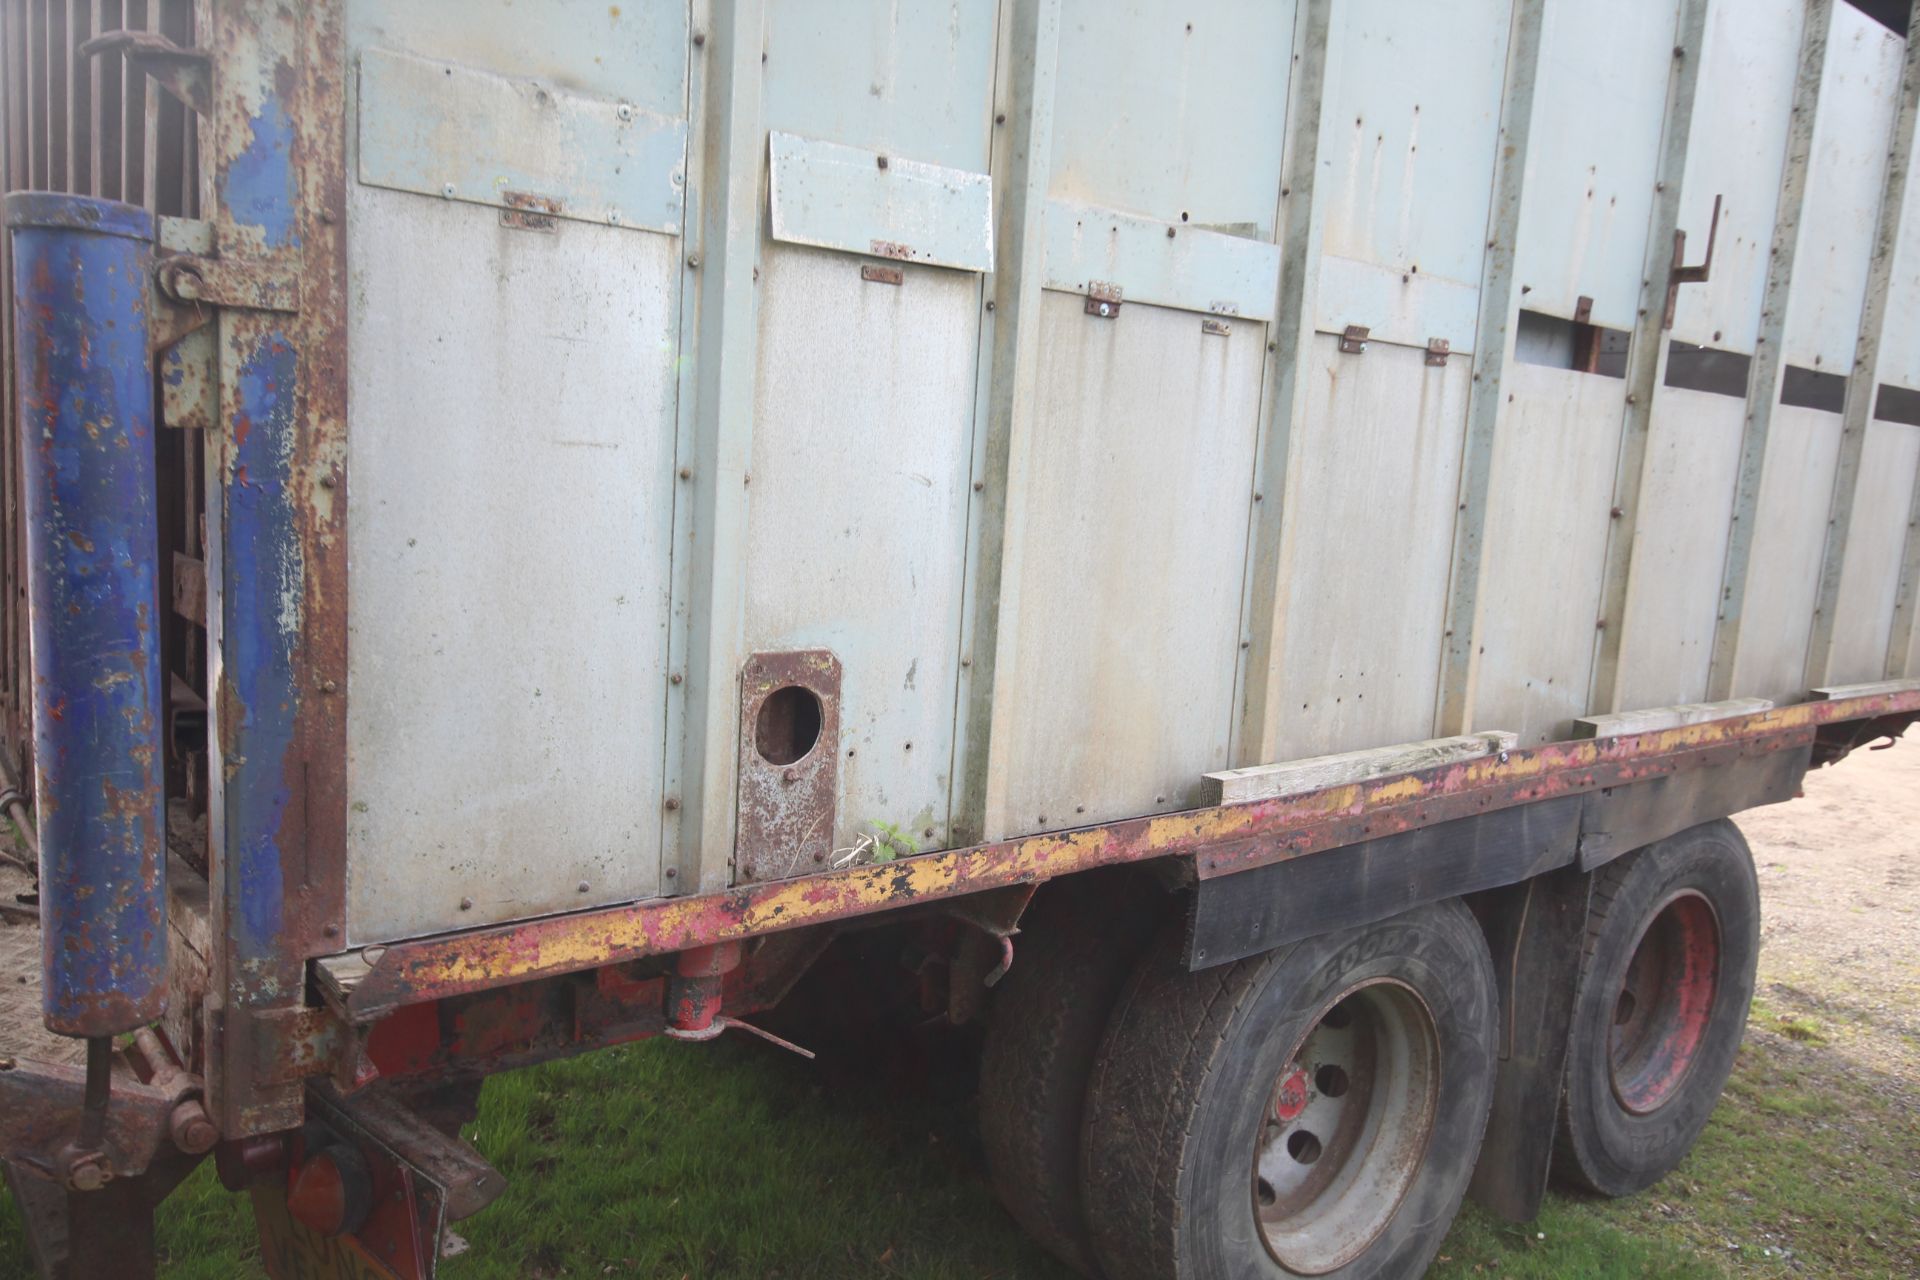 19ft 6in twin axle tractor drawn livestock trailer. Ex-lorry drag. With steel suspension and twin - Image 31 of 34